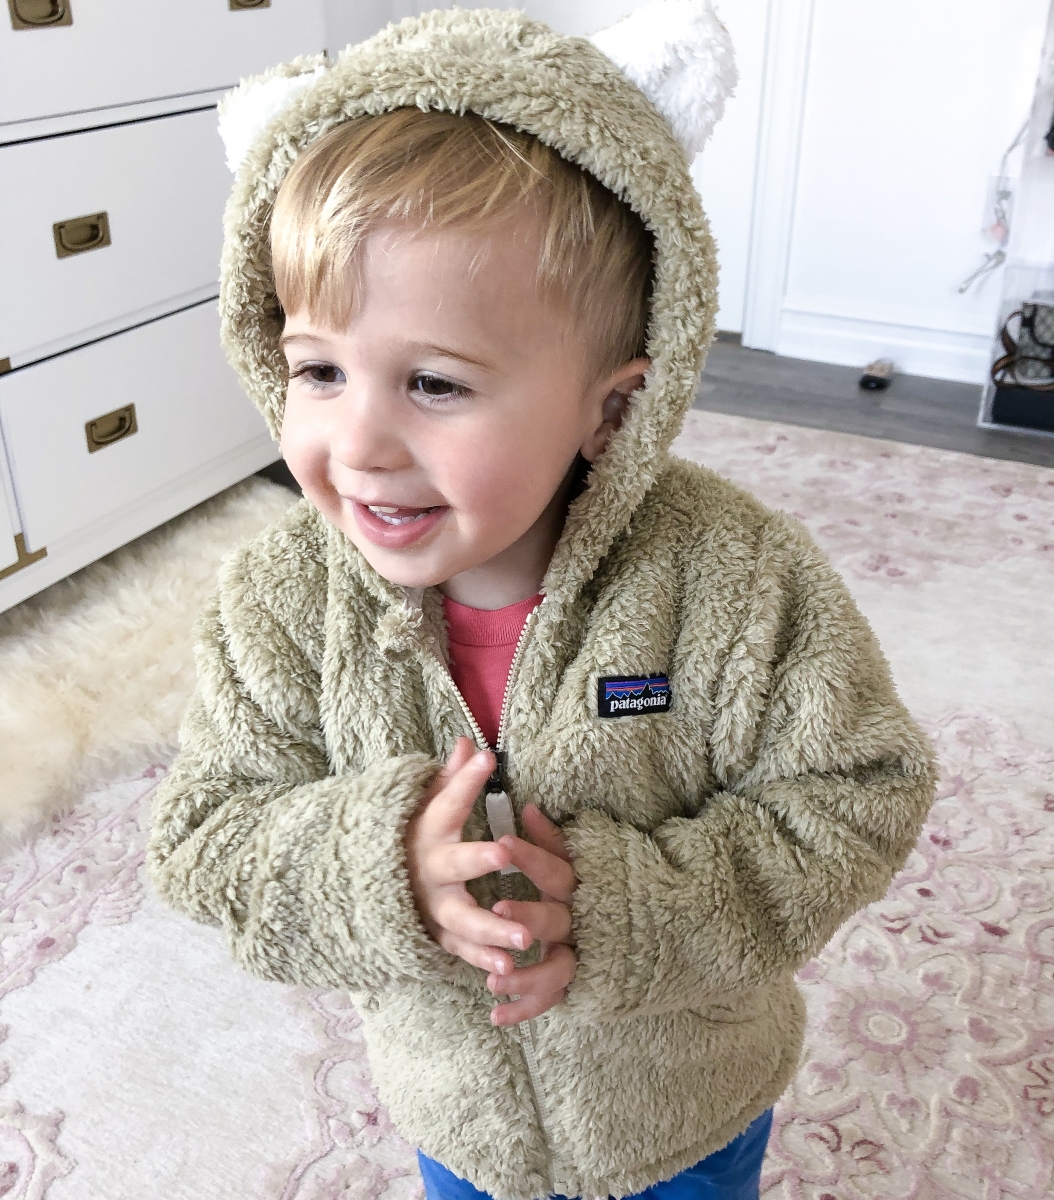 NSALE 2019 Toddler / Baby Items [Patagonia, Adidas] | The Sweetest Thing